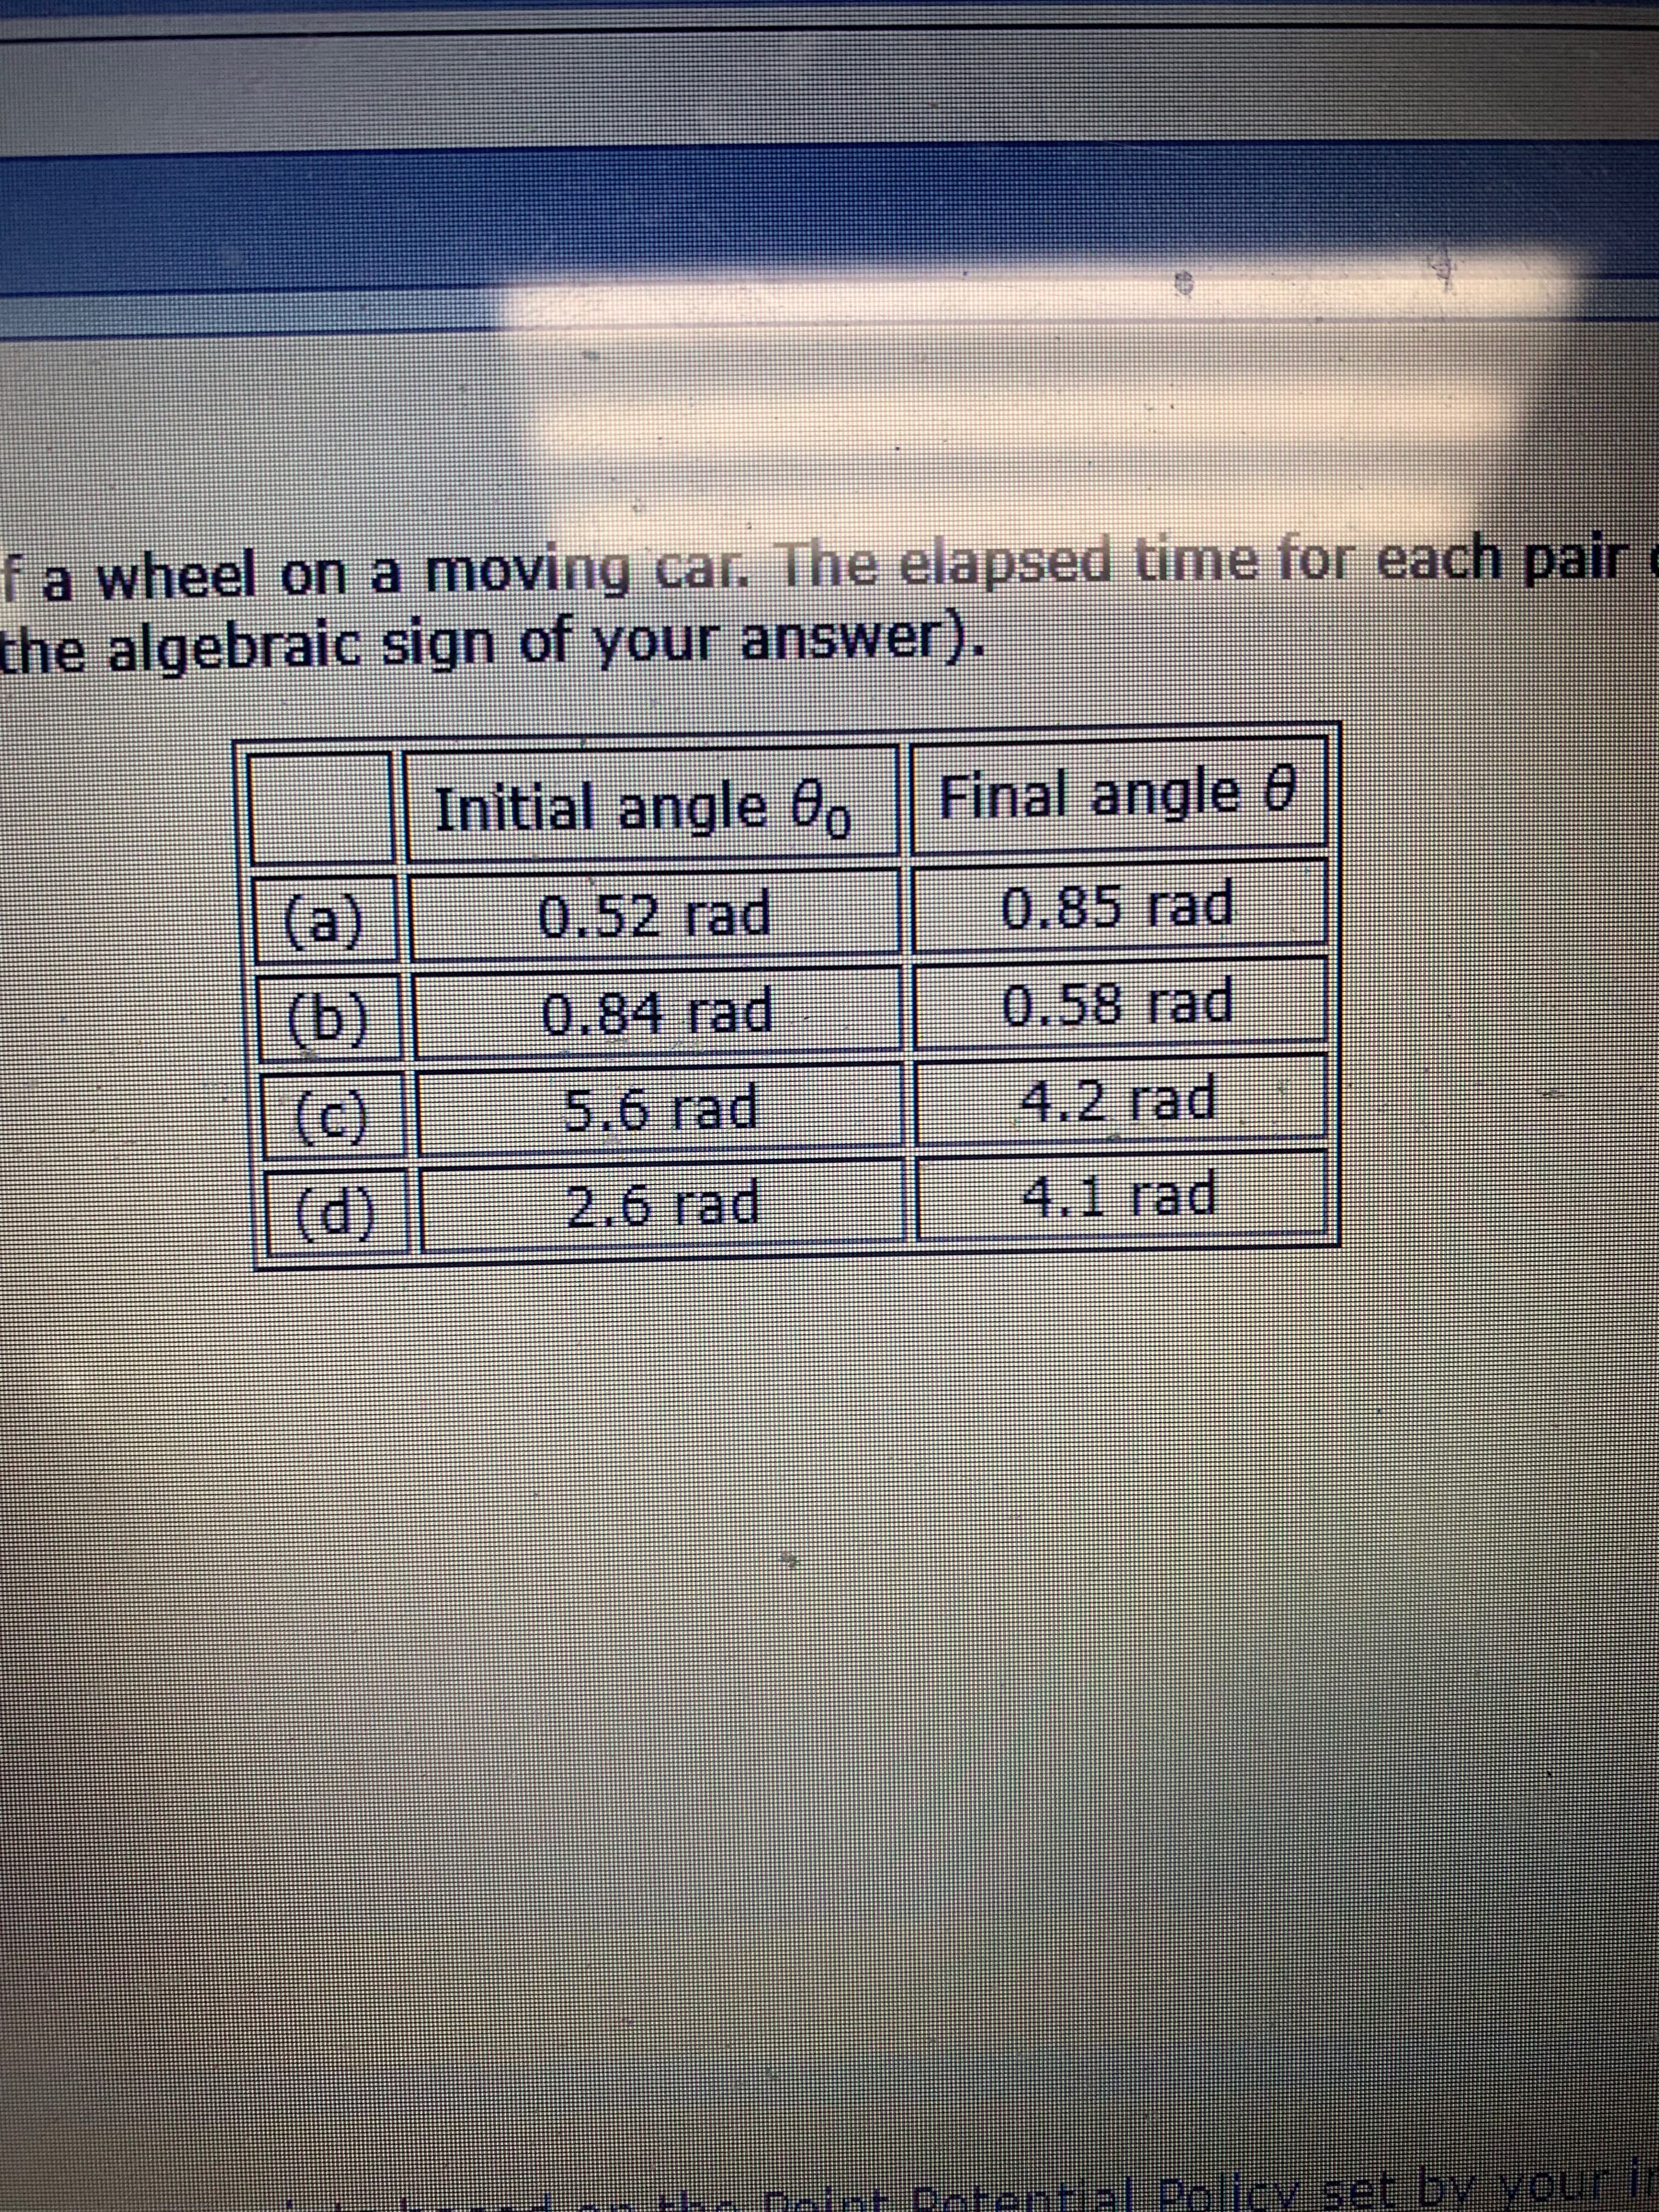 f a wheel on a moving car. The elapsed time for each pair
the algebraic sign of your answer).
Final angle 0
Initial angle 0
(a)
0.52 rad
0.85 rad
(b)
(C)
(d)
0.84 rad
0.58 rad
4.2 rad
5.6 rad
4.1 rad
2.6 rad
he totnt Catential Policy set by vouir l
